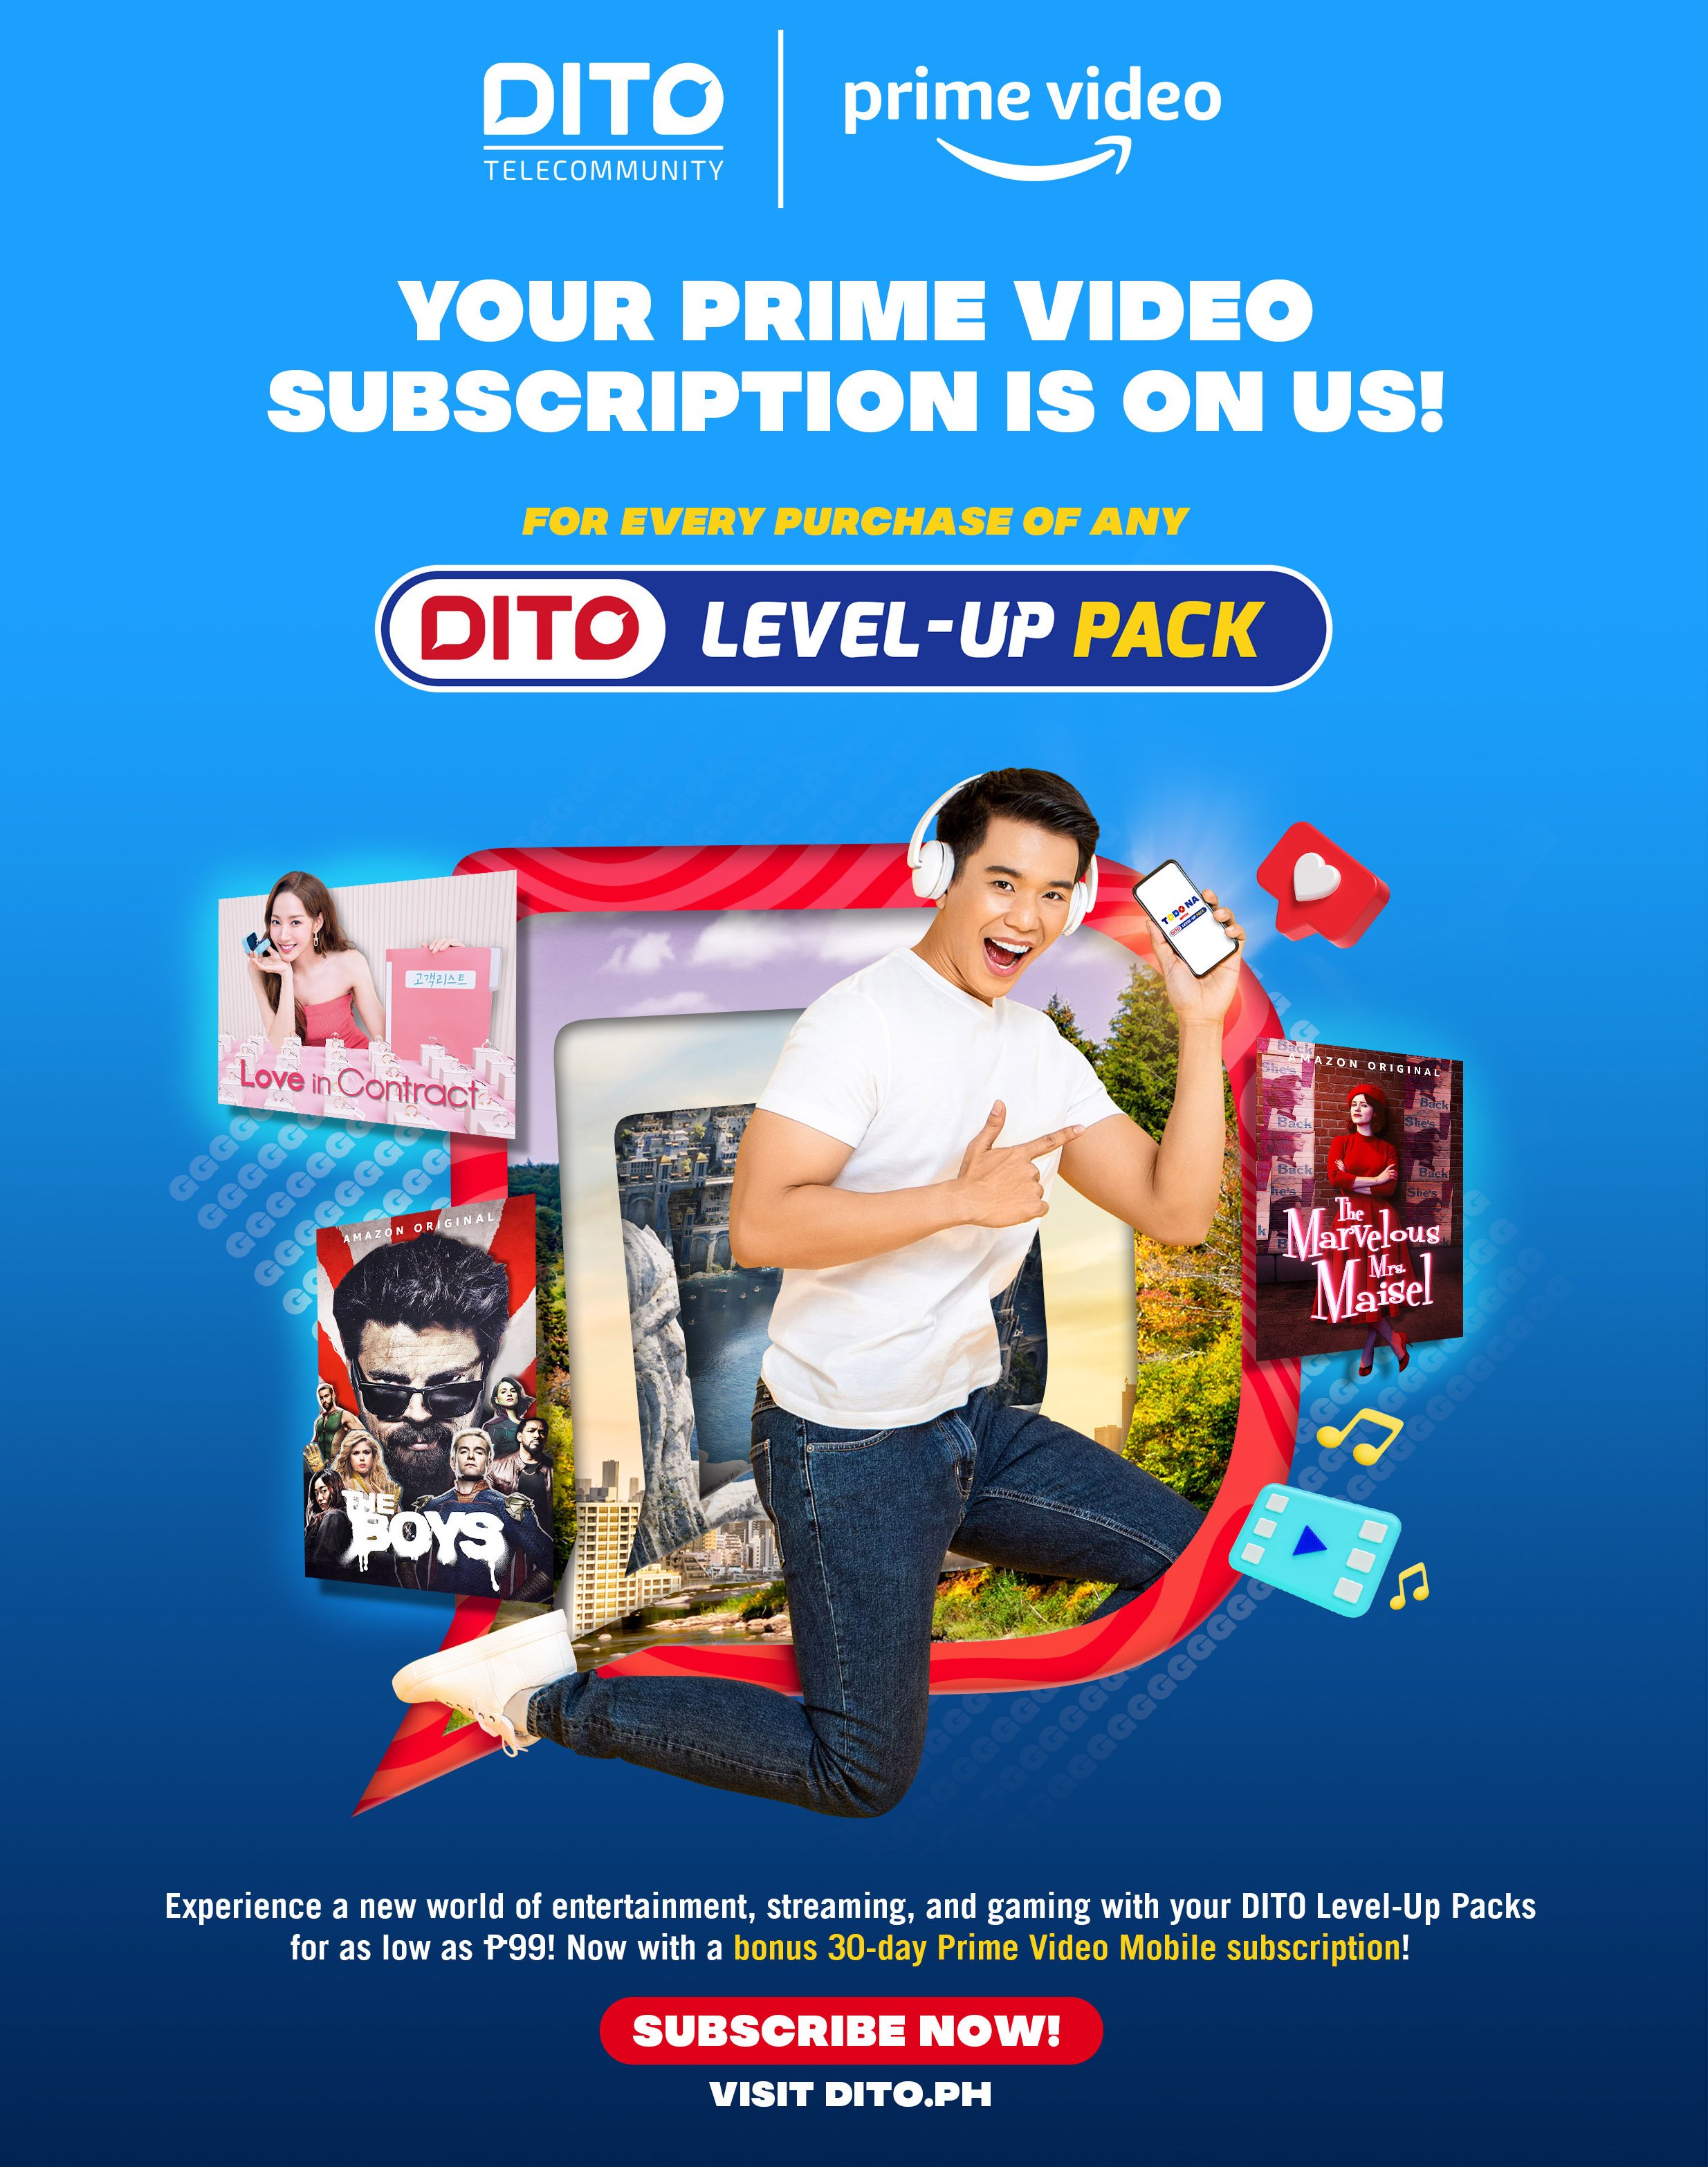 DITO Level Up Plan subscribers to enjoy Bonus 30-day Prime Video Mobile subscription